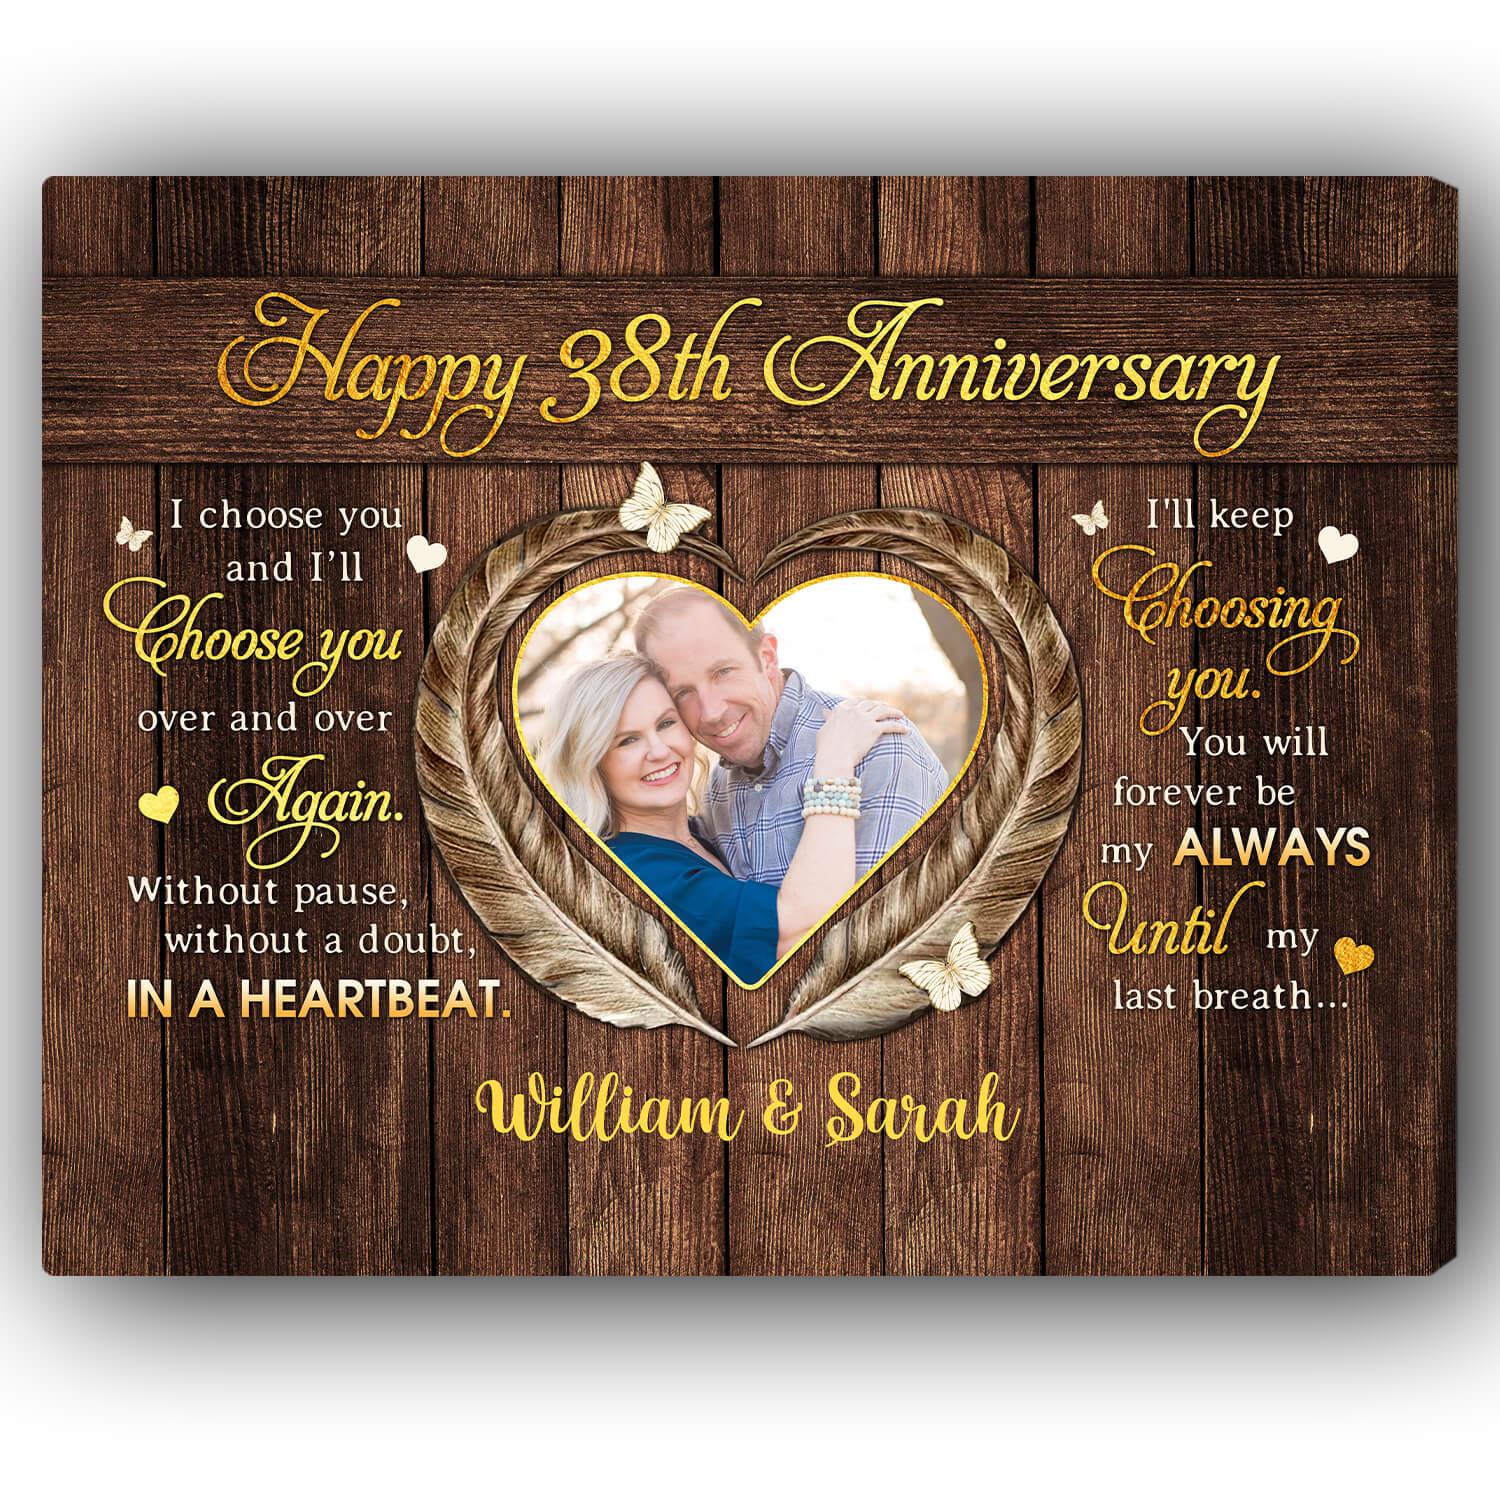 Happy 38th Anniversary - Personalized 38 Year Anniversary gift For Husband or Wife - Custom Canvas Print - MyMindfulGifts